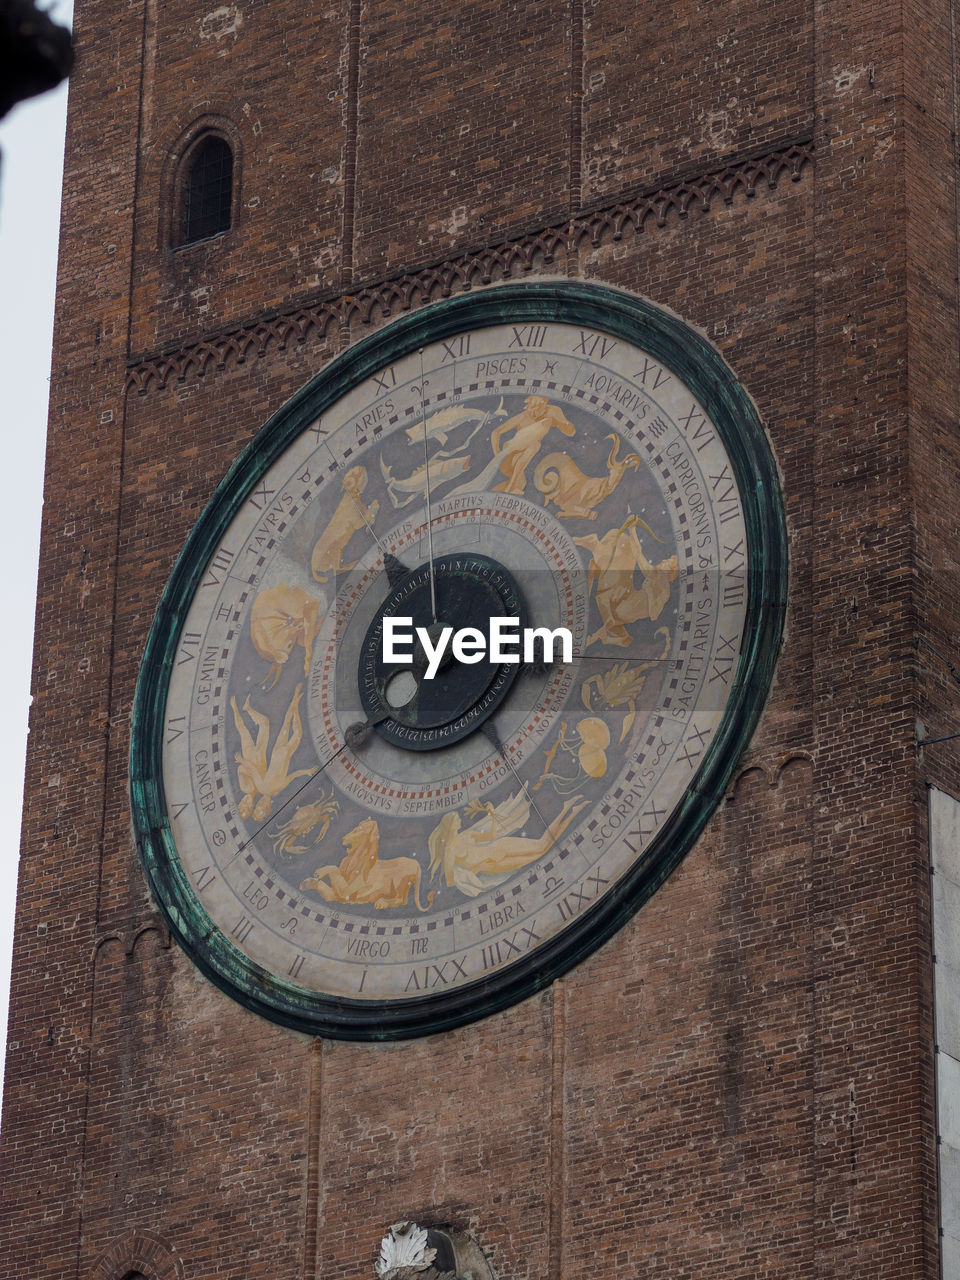 architecture, clock, time, no people, built structure, building exterior, clock tower, wood, tower, day, circle, ancient history, iron, history, roman numeral, building, the past, low angle view, travel destinations, geometric shape, religion, clock face, astronomy, space, art, close-up, place of worship